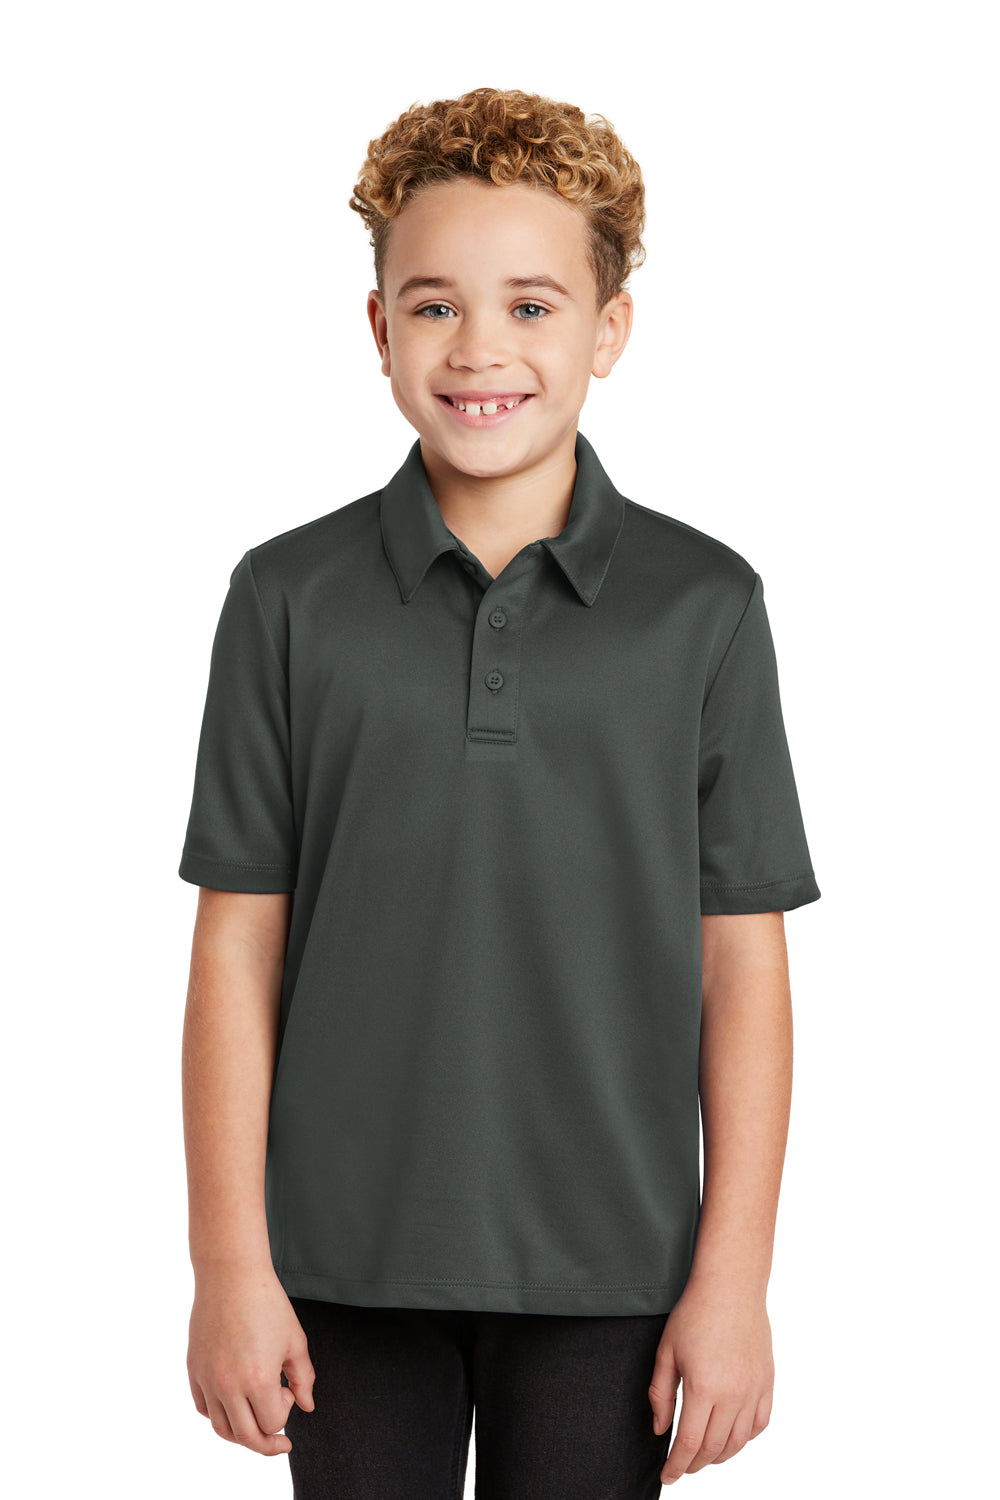 Port Authority Y540 Youth Silk Touch Performance Moisture Wicking Short Sleeve Polo Shirt Steel Grey Front